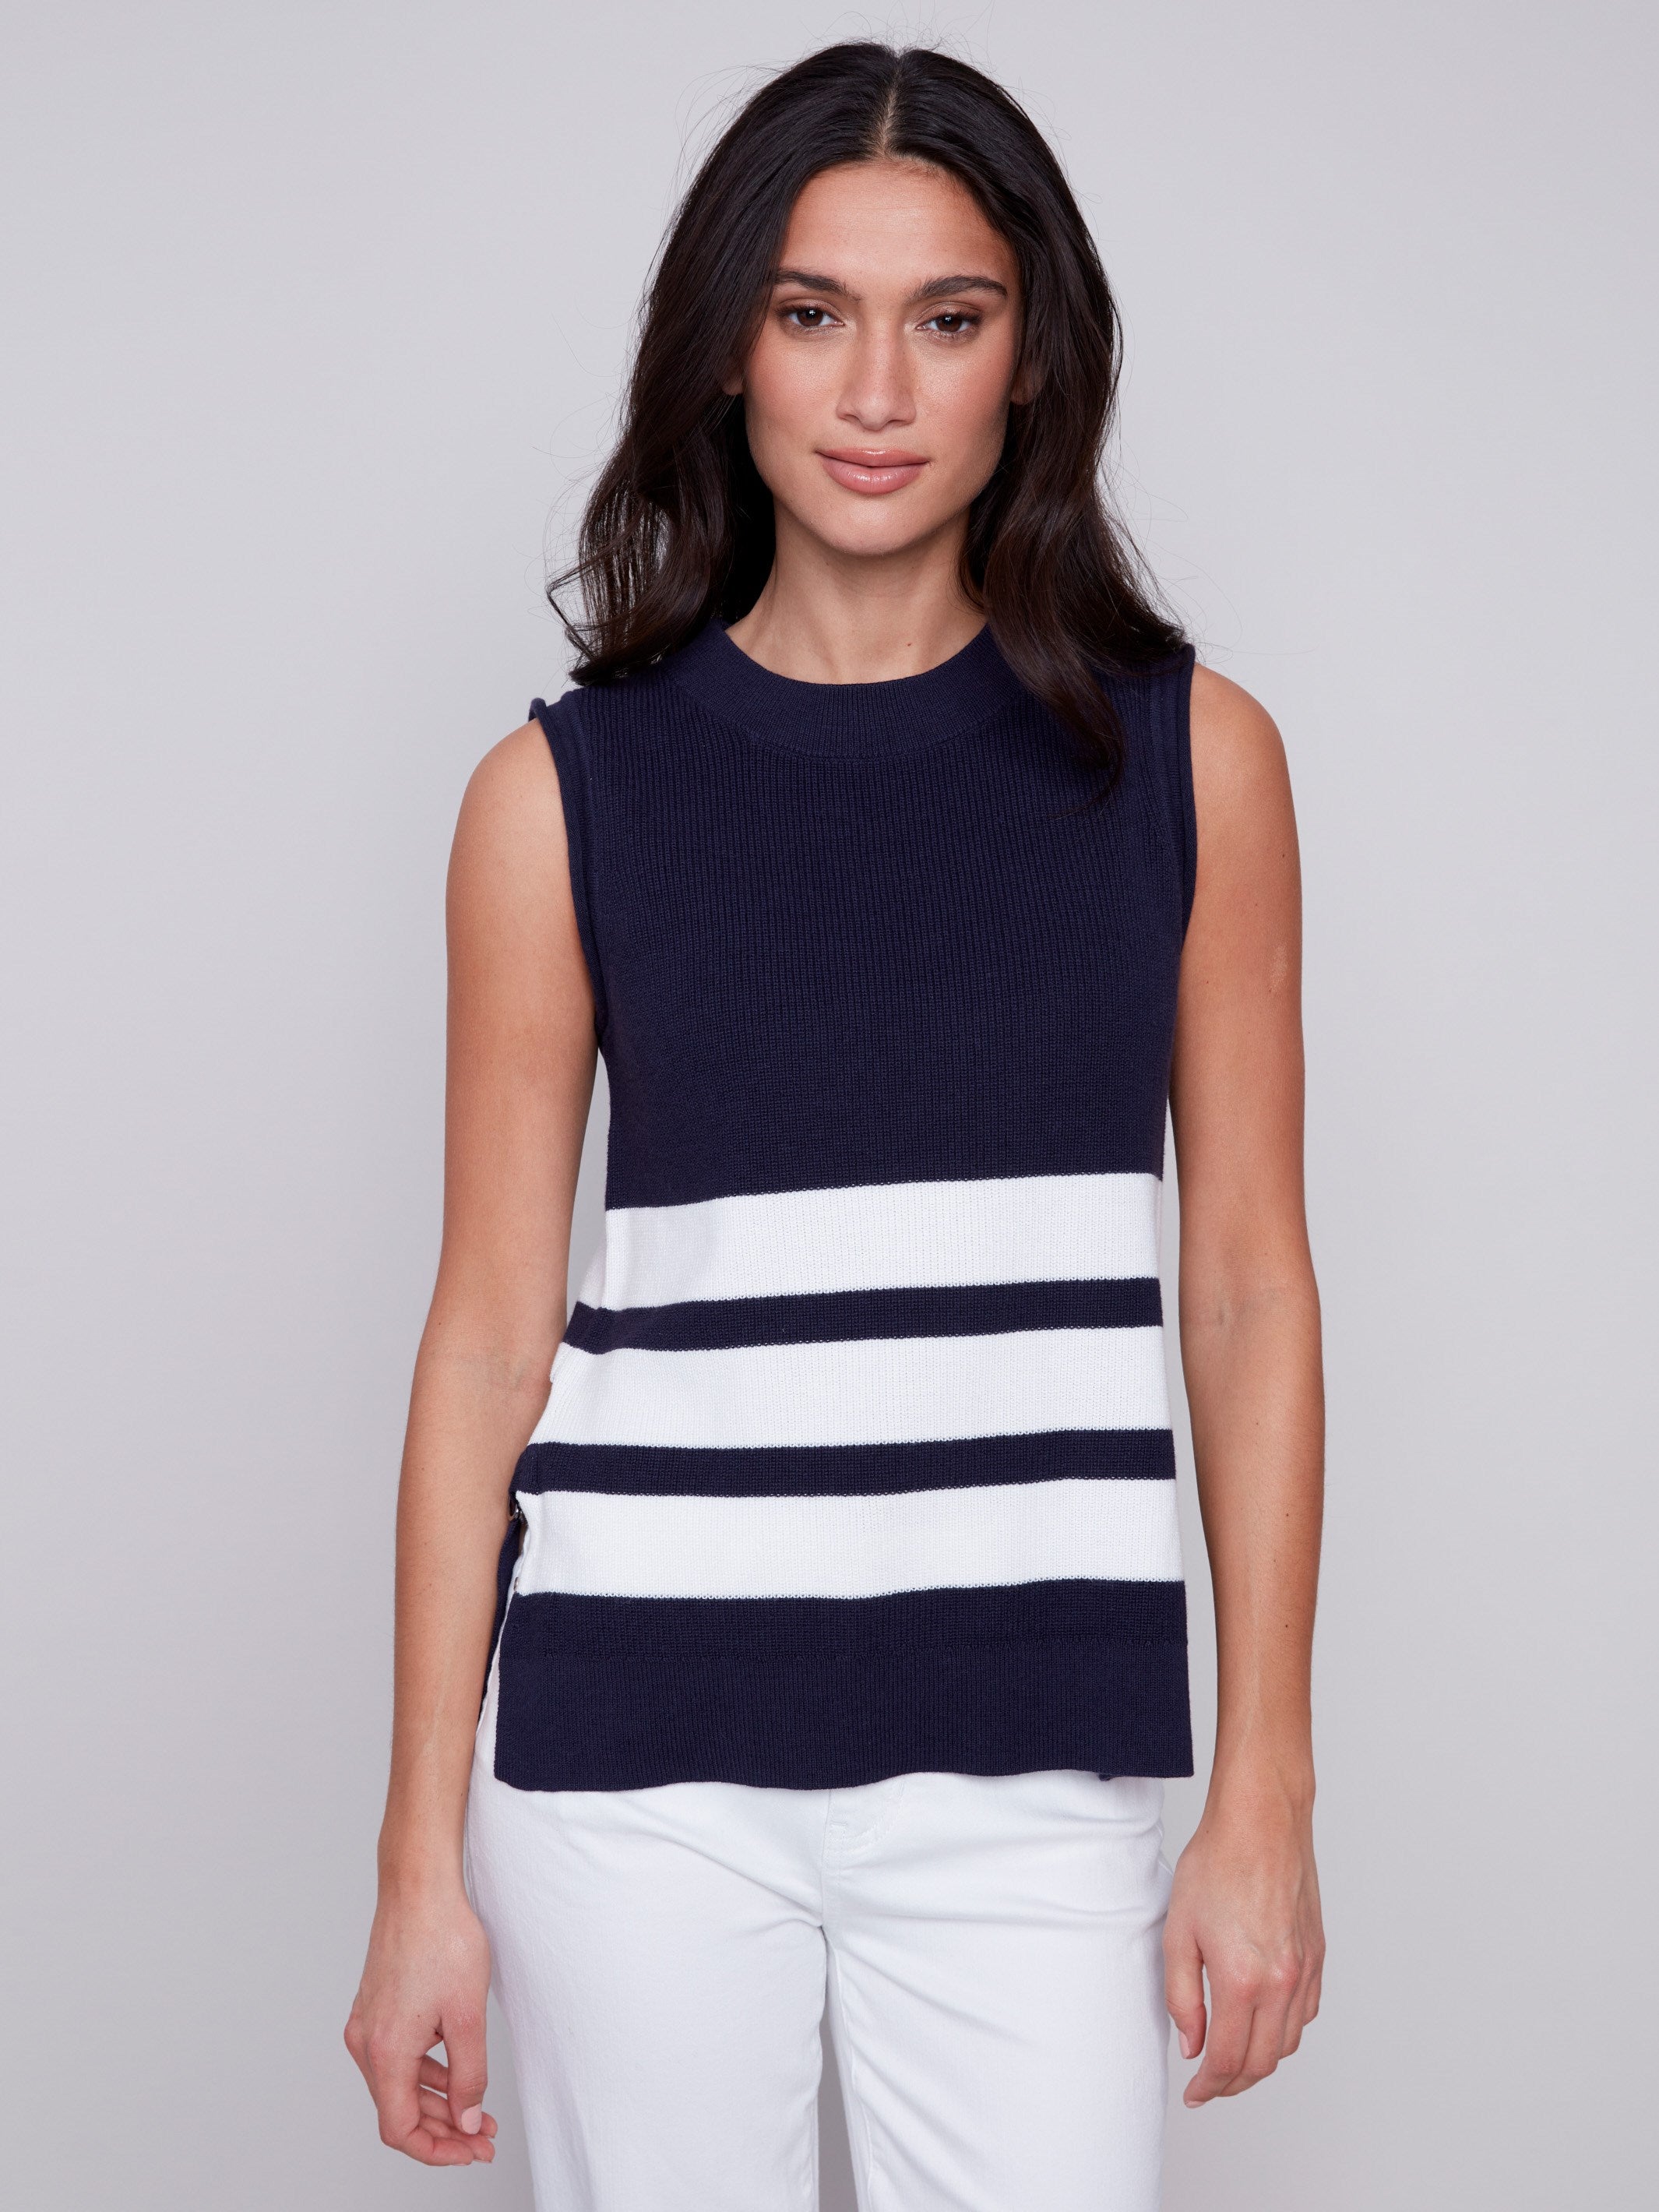 Striped Sweater Vest - Navy - Charlie B Collection Canada - Image 4